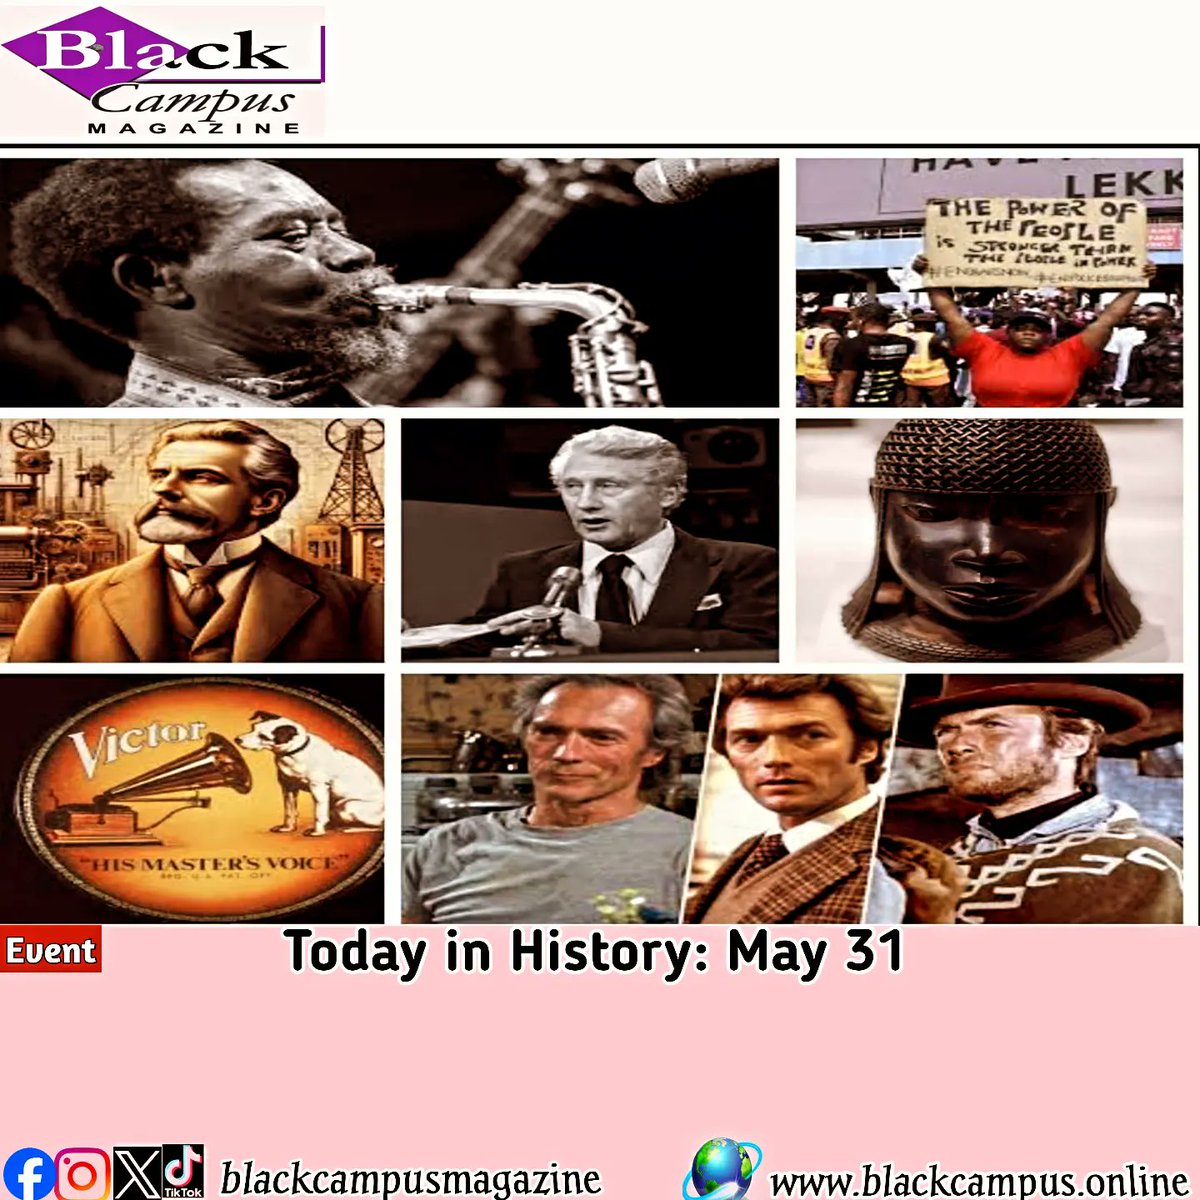 Today in History: May 31 b.blackcampus.online/today-in-histo…
.
.
.
.
#blackcampusmagazine #campuslife #historyfacts #historyinthemaking #historylovers #fyphistory #benin #goviralreels